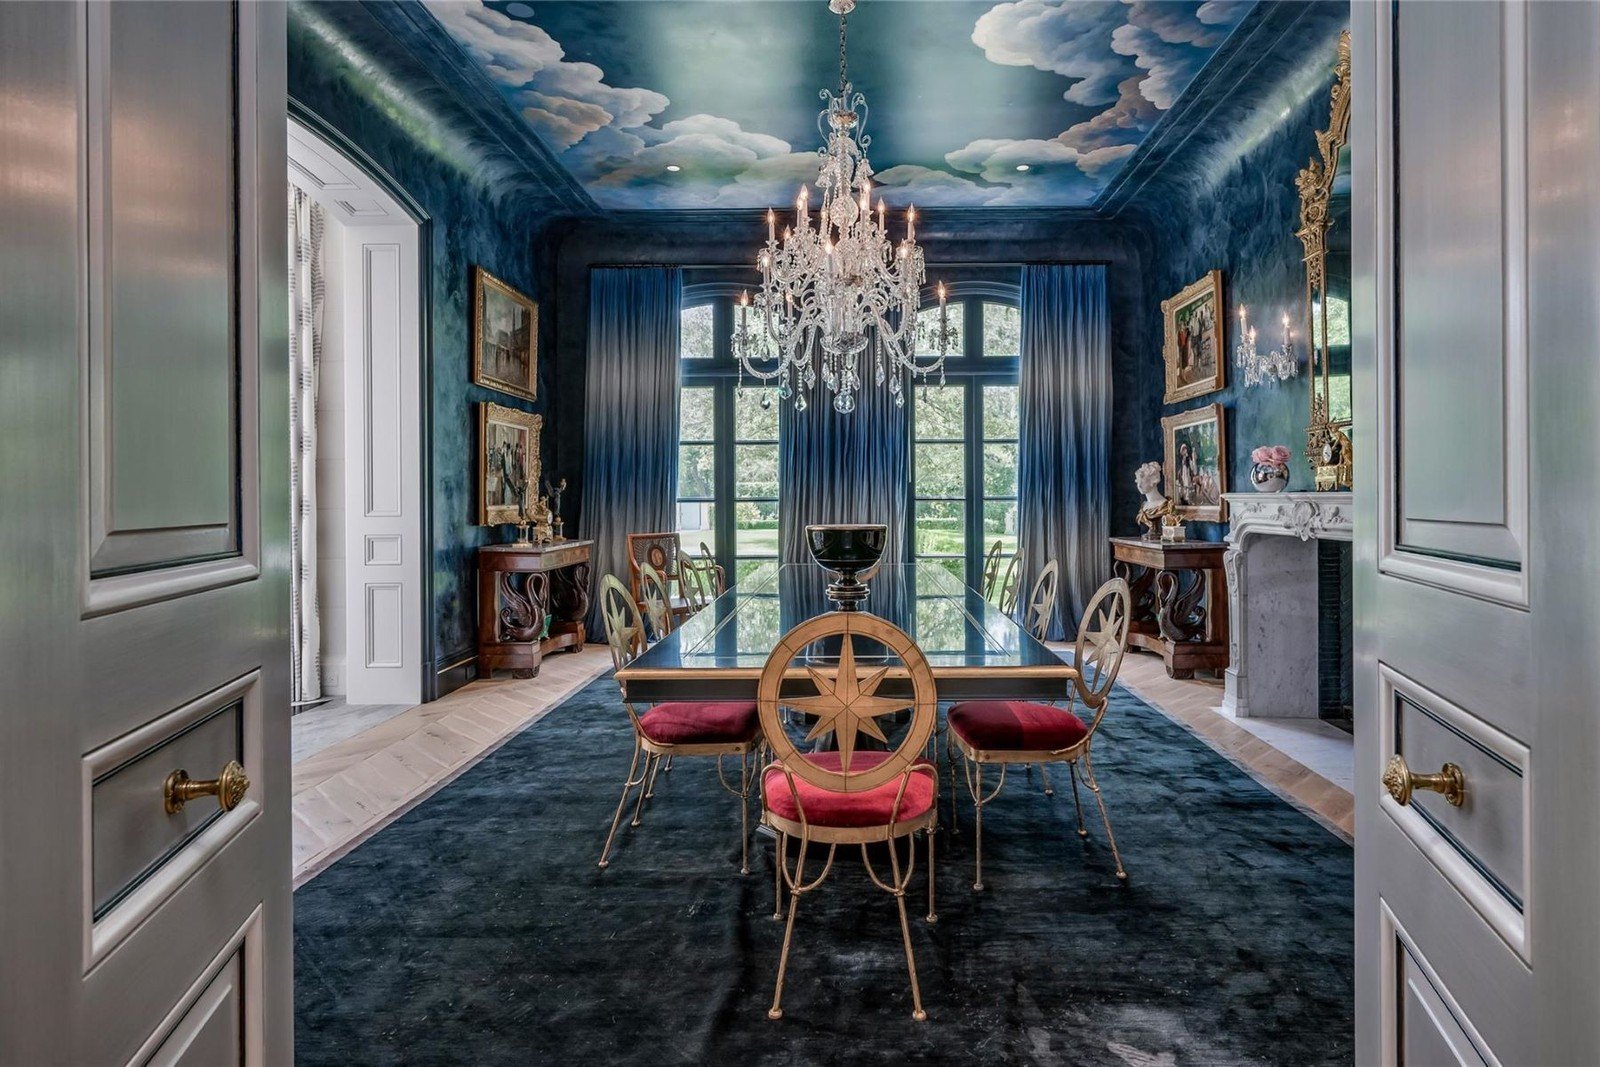 Francis York French Chateau-Style Mansion in Houston, Texas m00016.jpeg